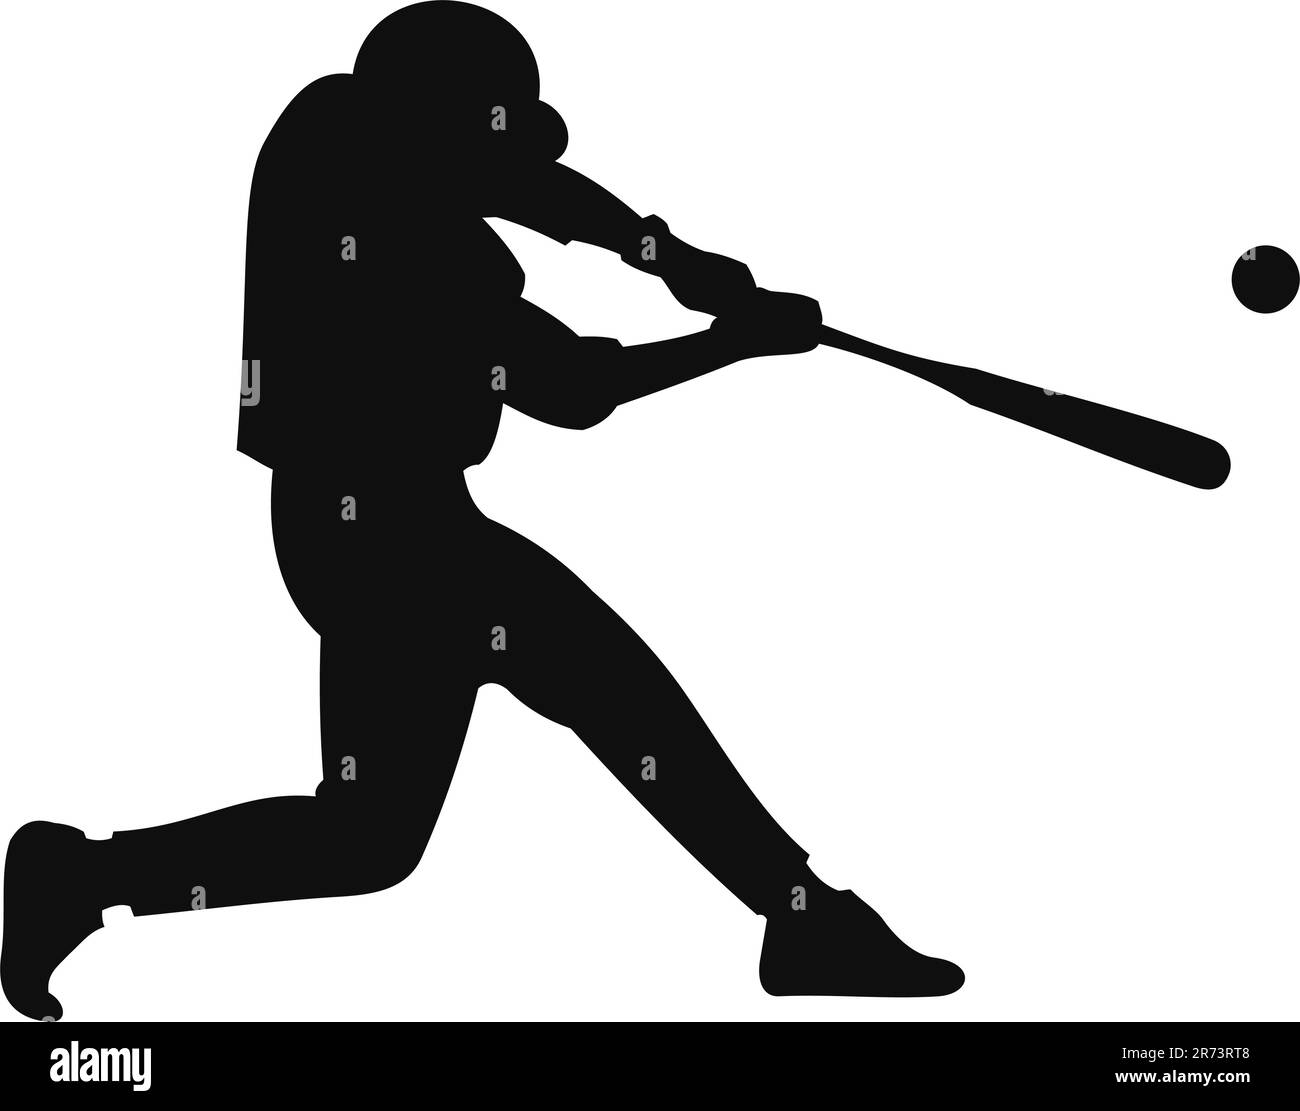 Batter player Stock Vector Images - Alamy